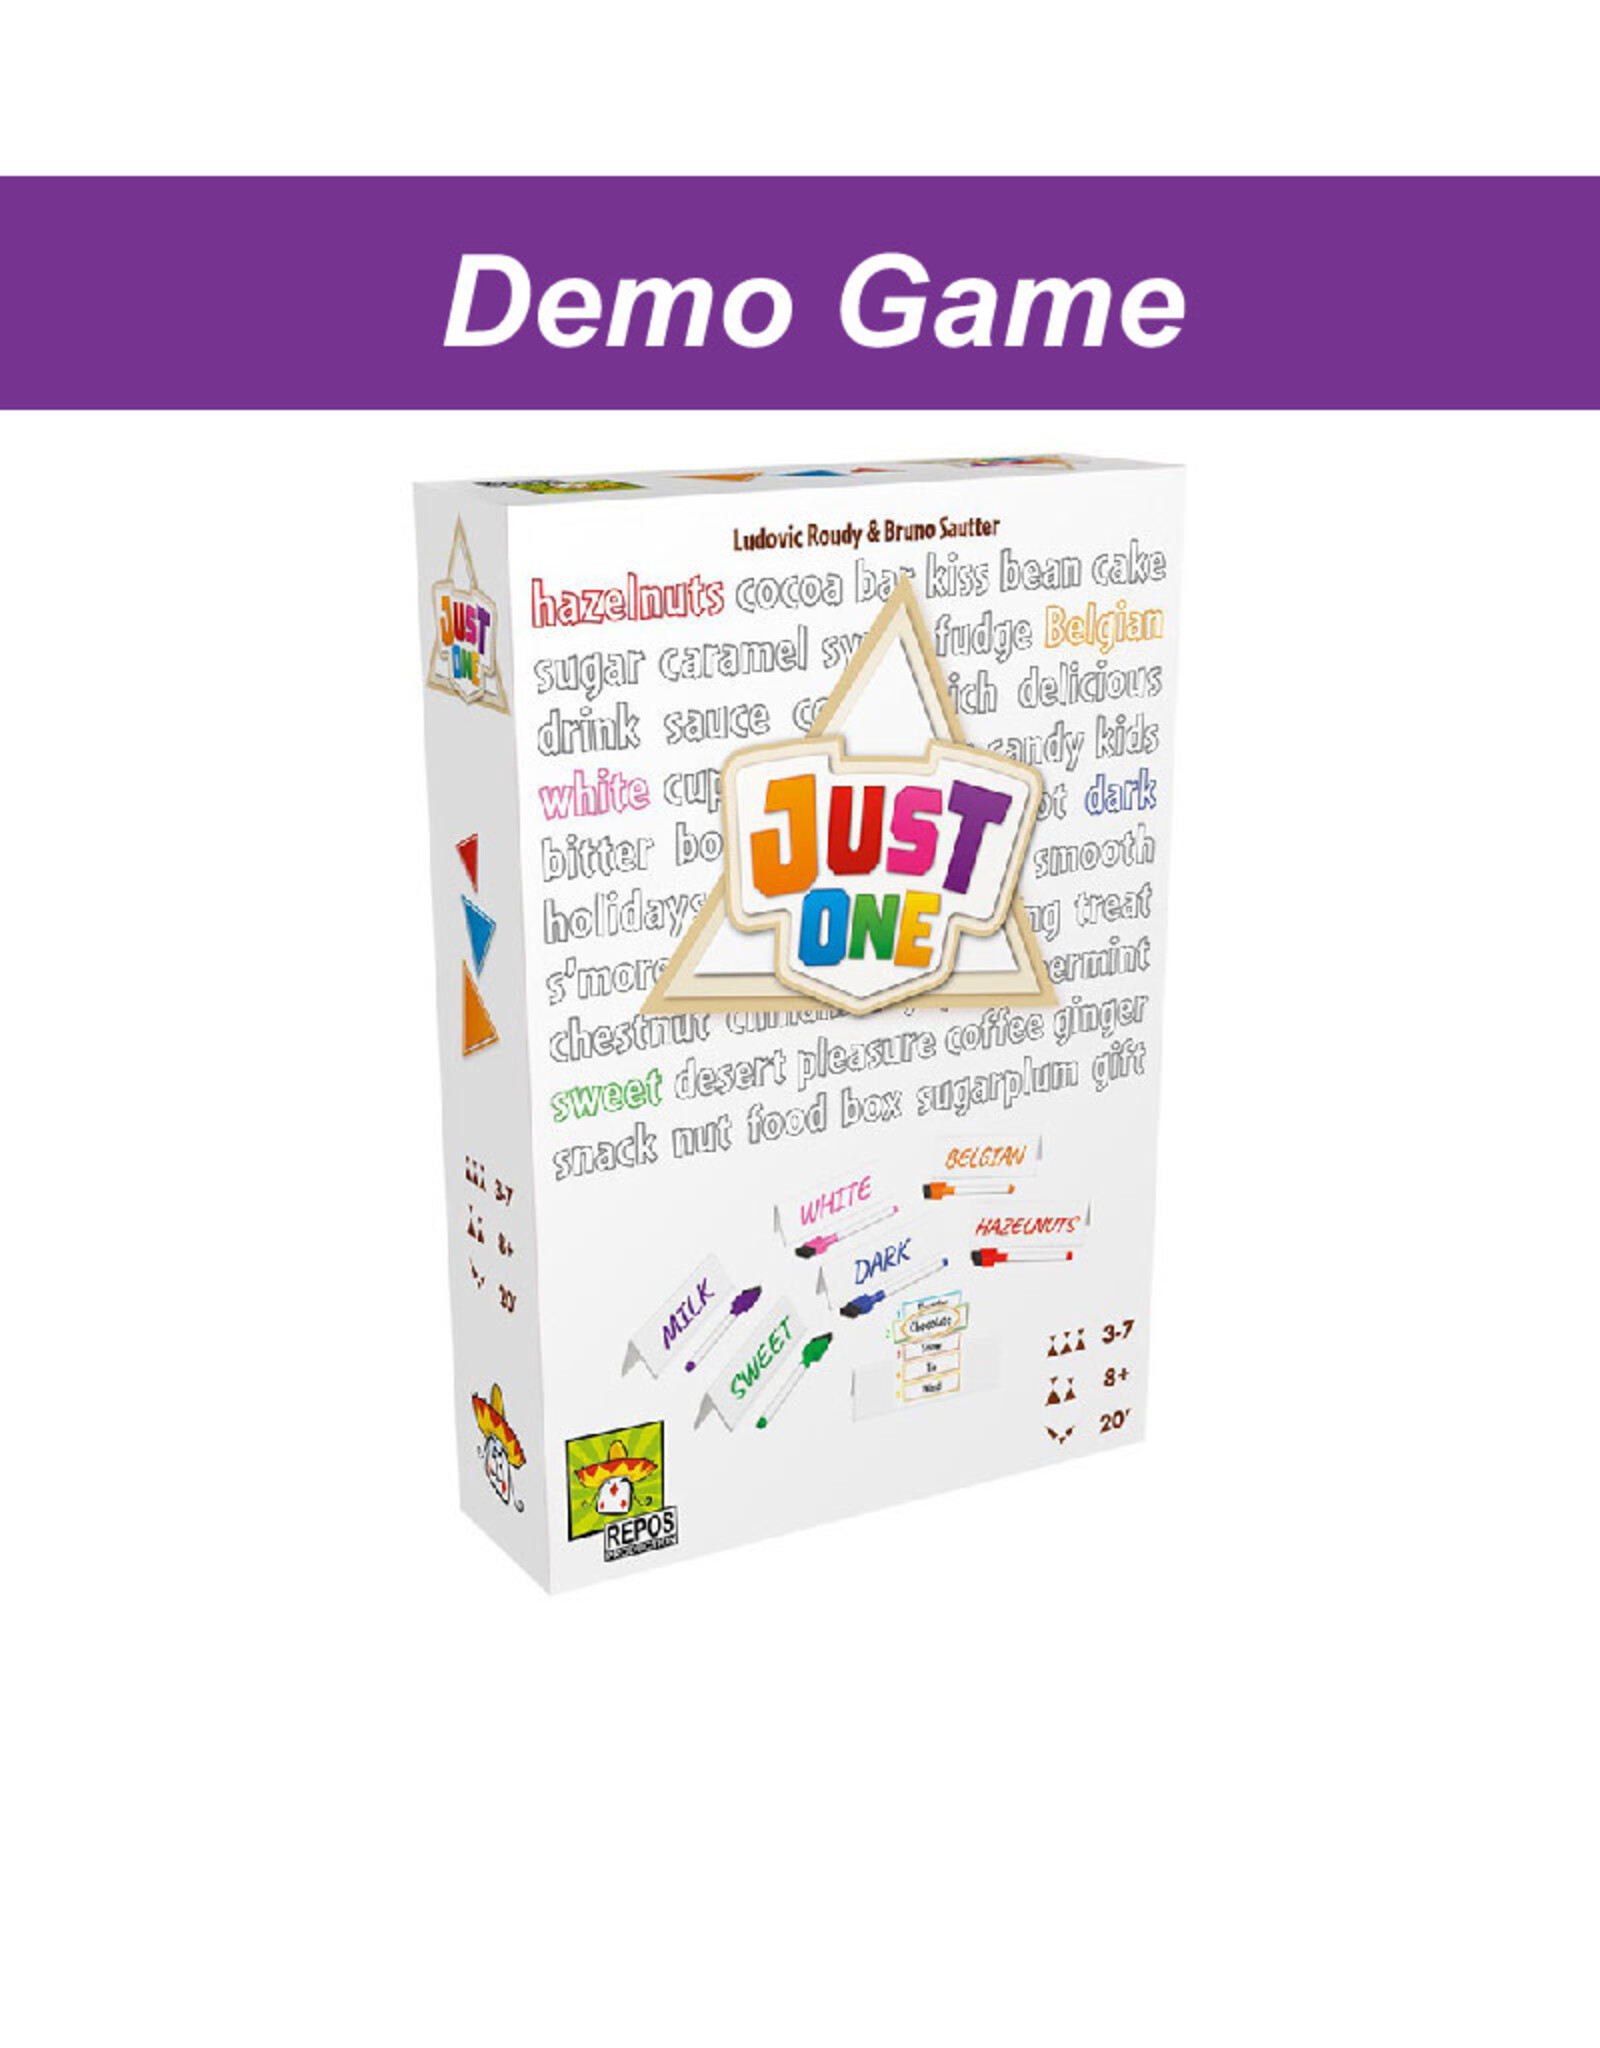 Game Night Games (DEMO) Just One. Free to Play In Store!